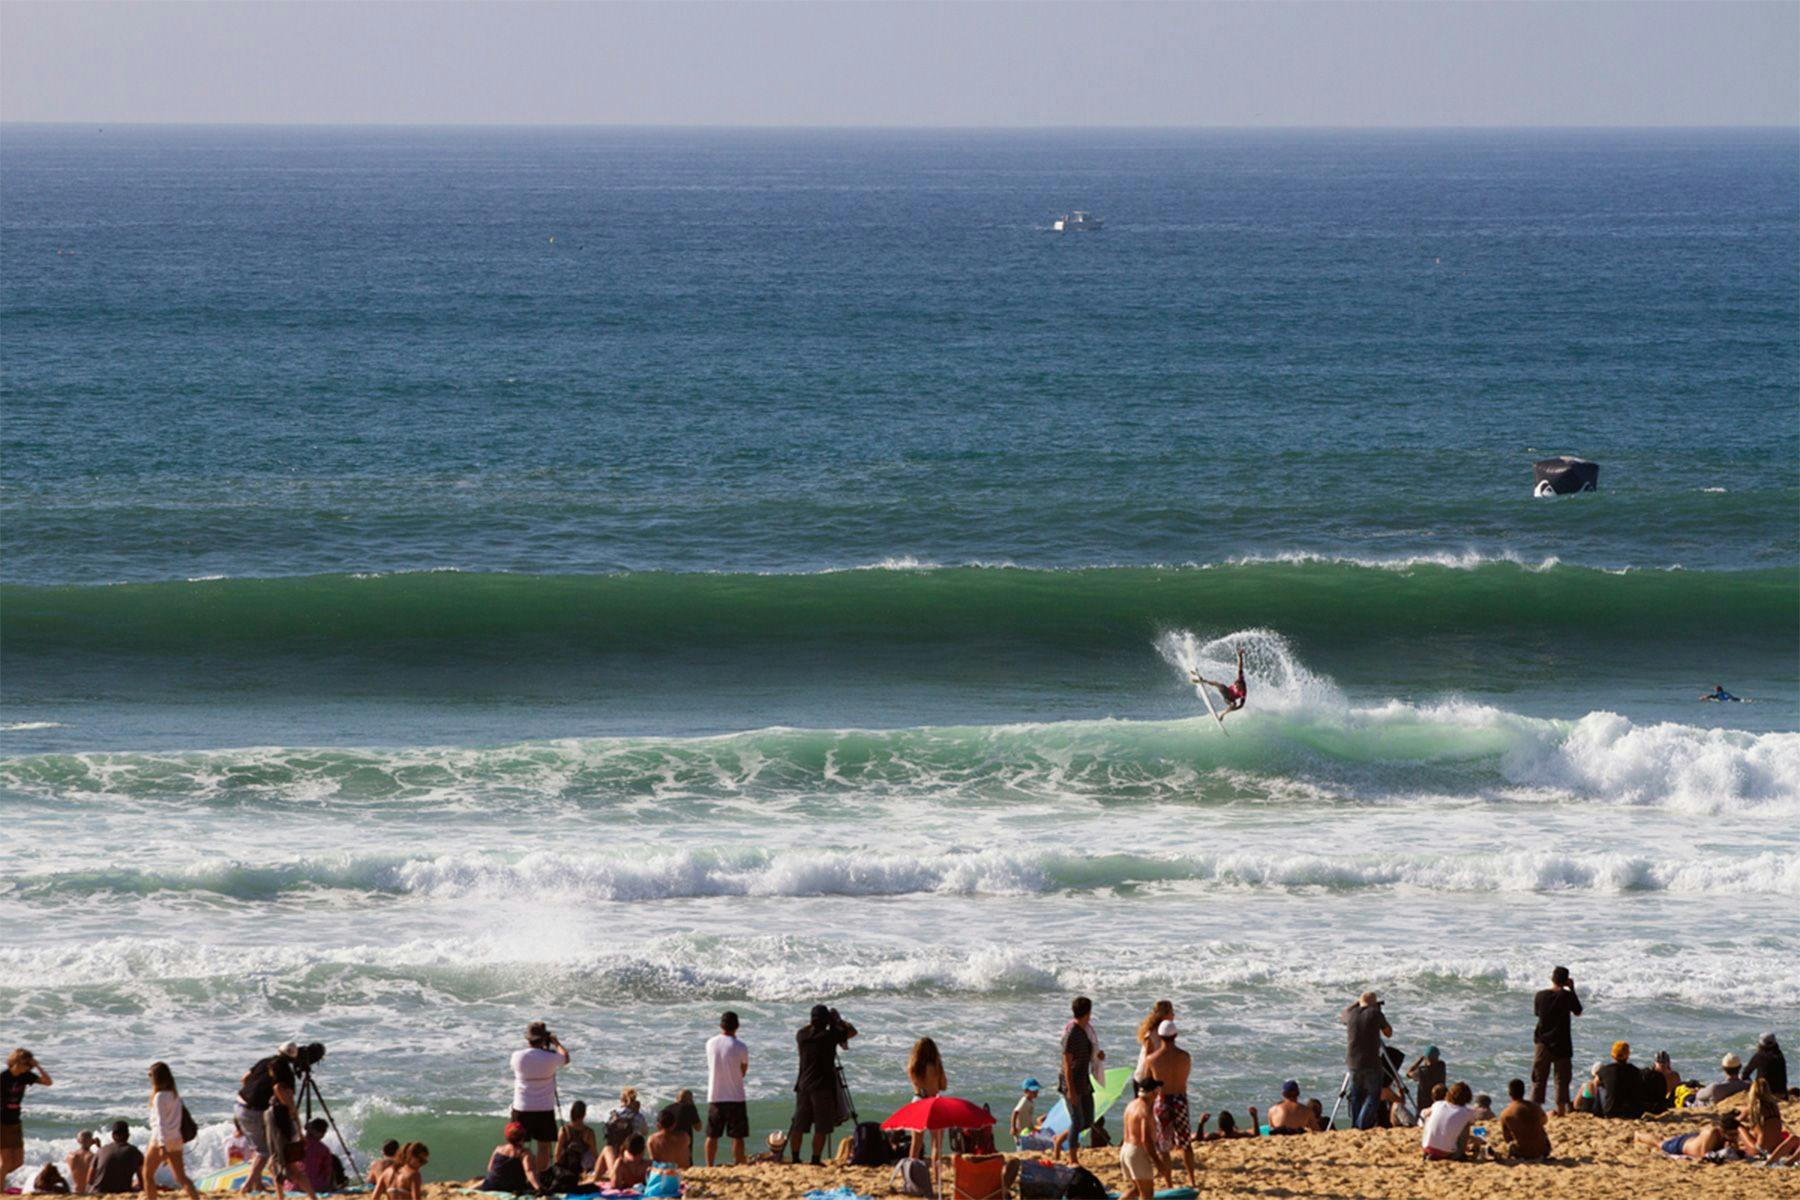 champion surfer john john florence doing an air reverse at the quiksilver pro contest in hossegor